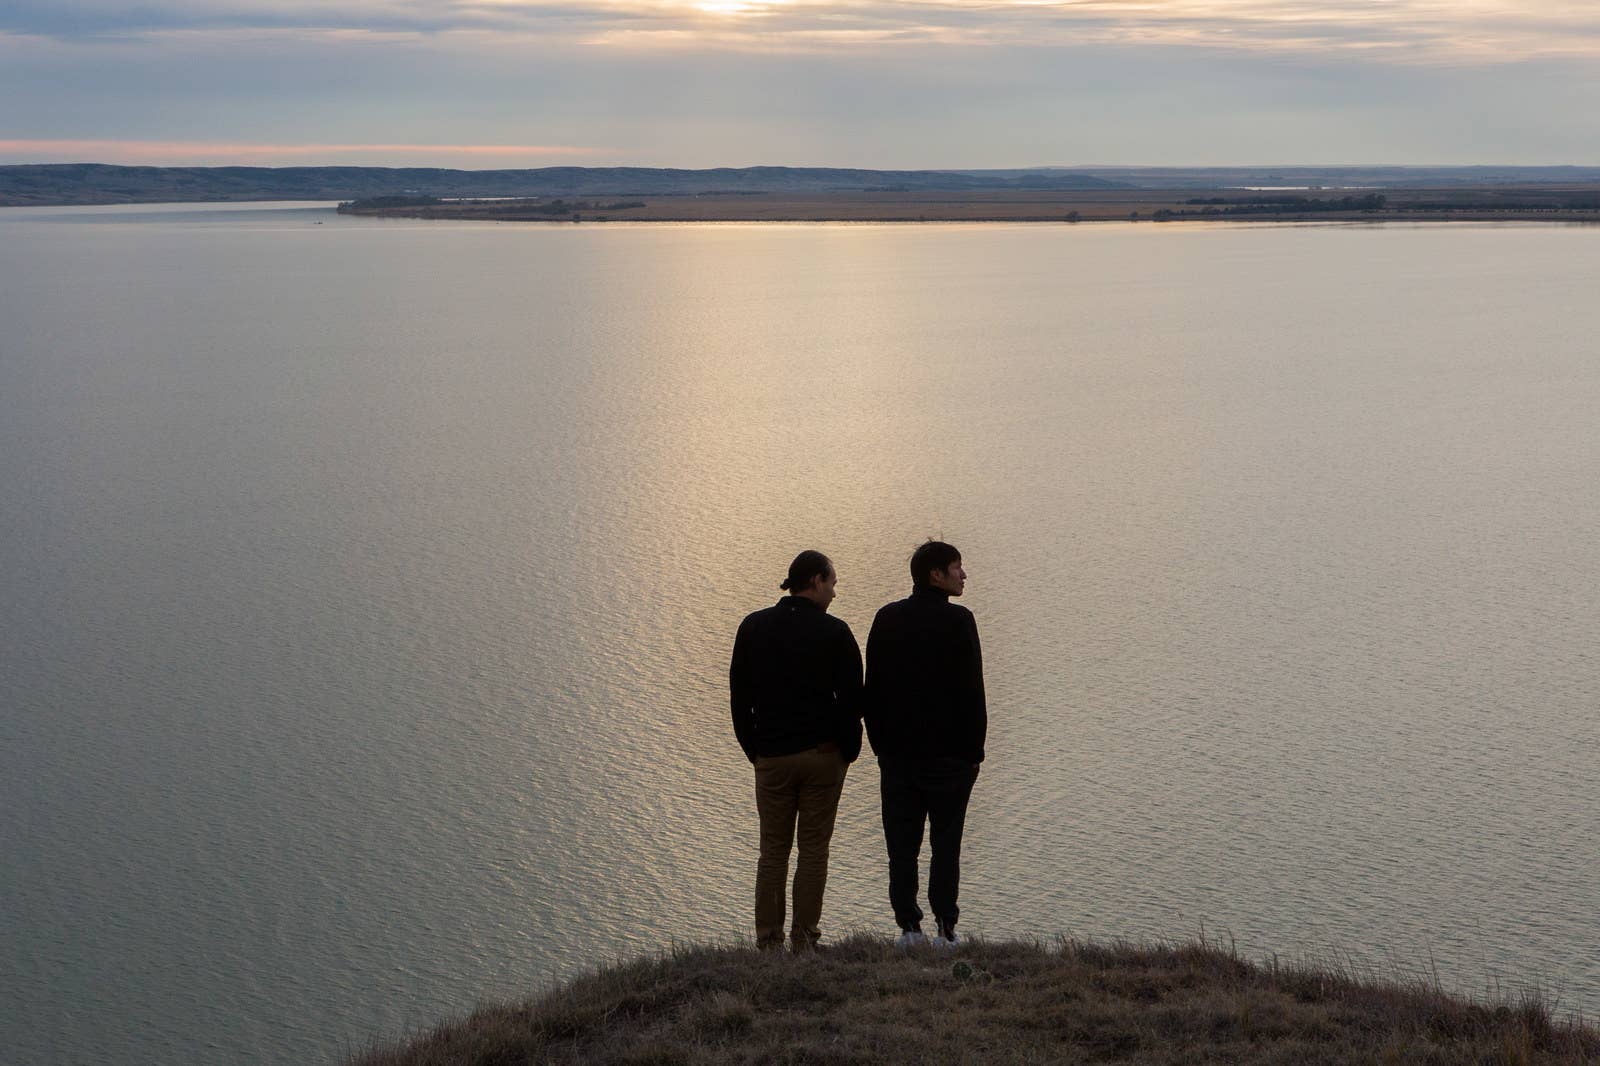 Joseph White Eyes and Danny Grassrope stand on a bluff overlooking the Missouri River on the Lower Brule Reservation in South Dakota on Nov. 8, 2017. Grassrope grew up in Lower Brule and returned there with White Eyes after the #NoDAPL camps in Standing Rock were evicted in early 2017. Grassrope and White Eyes are now working as environmental activists in Lower Brule and beyond.